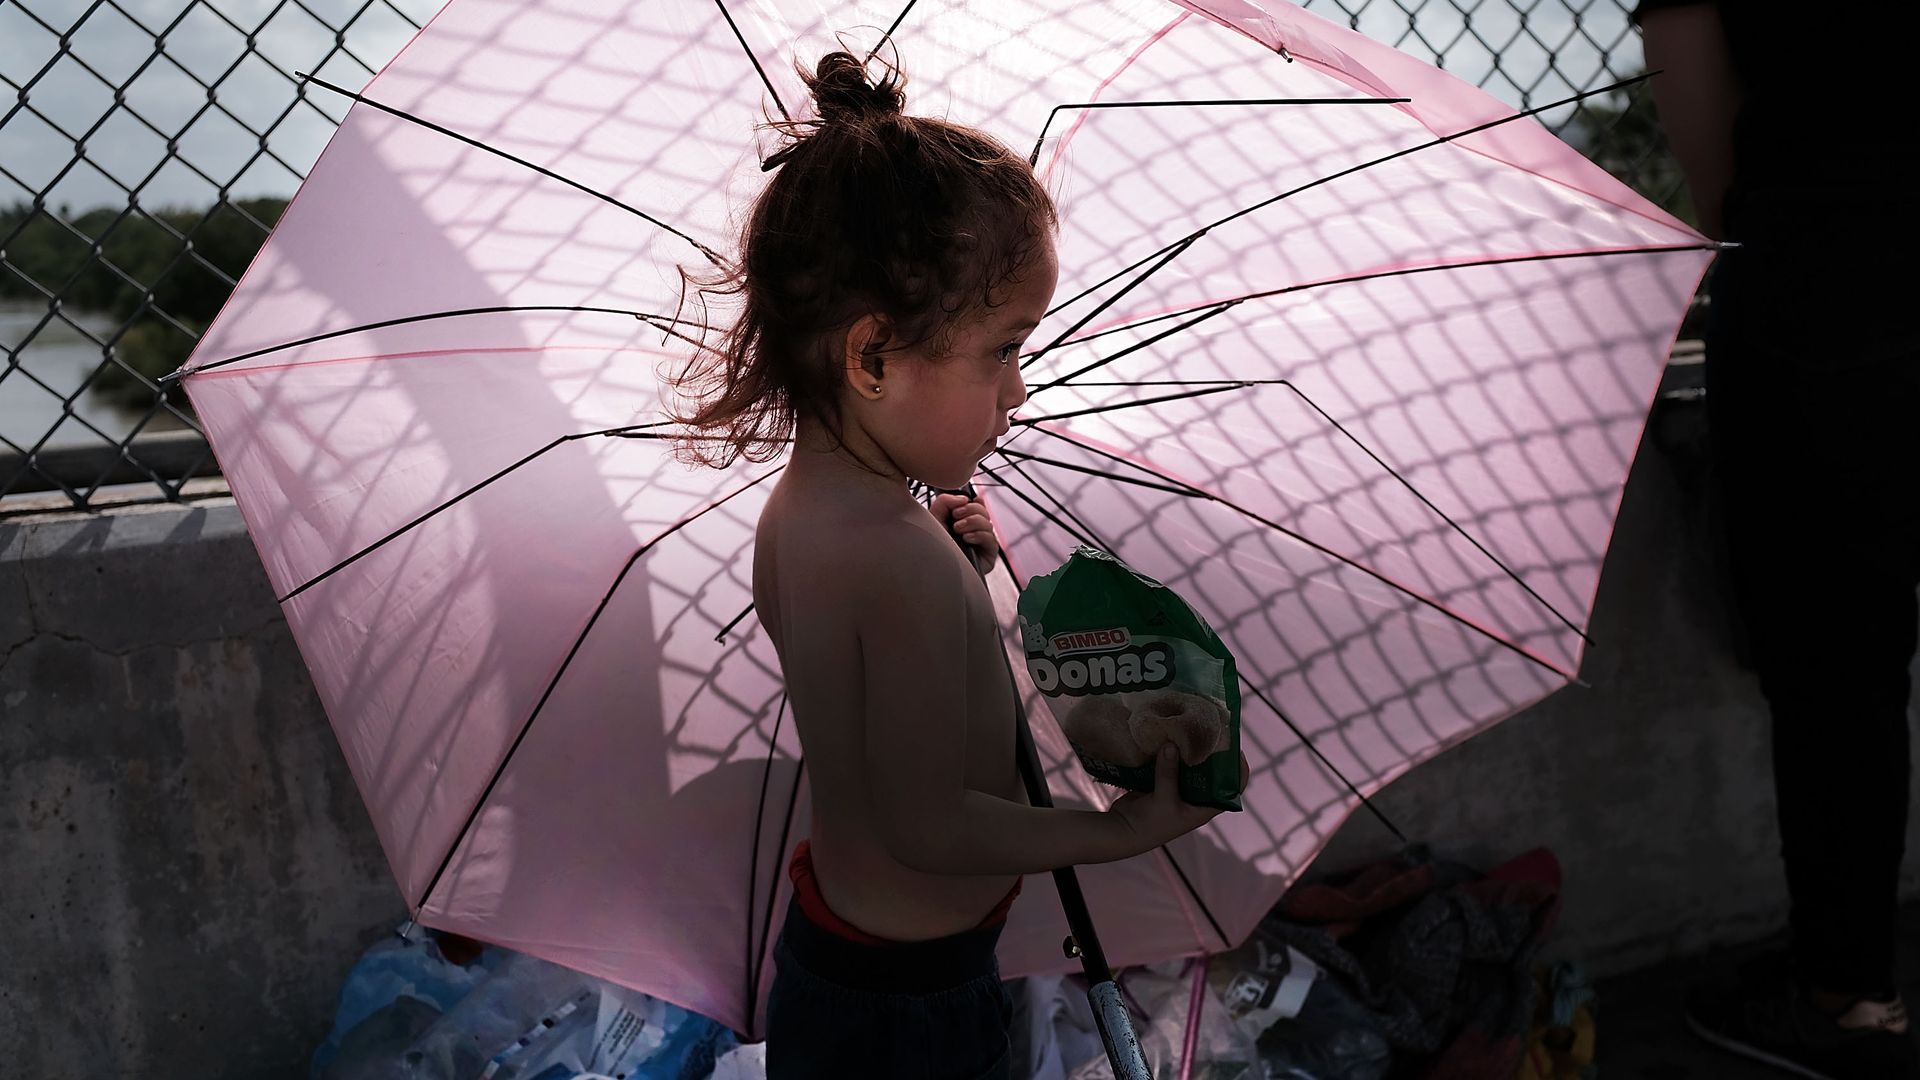 A child migrant holding a bag of chips and a big, pink umbrella